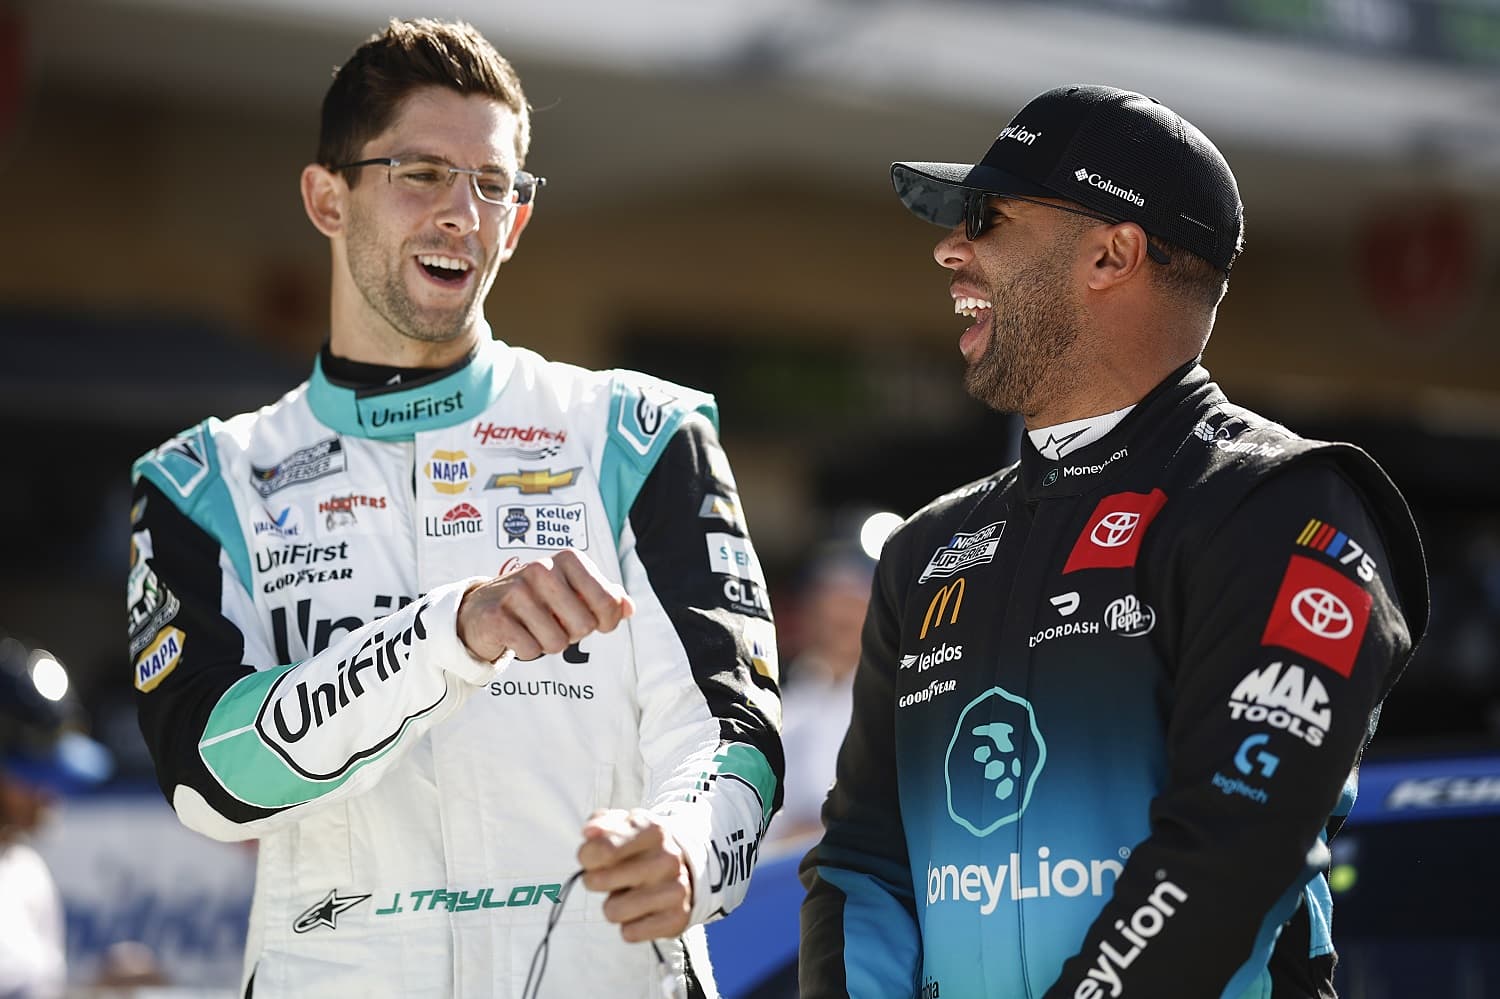 Drivers Jordan Taylor and Bubba Wallace share a laugh during qualifying for the NASCAR Cup Series EchoPark Automotive Grand Prix at Circuit of The Americas on March 25, 2023. | Chris Graythen/Getty Images